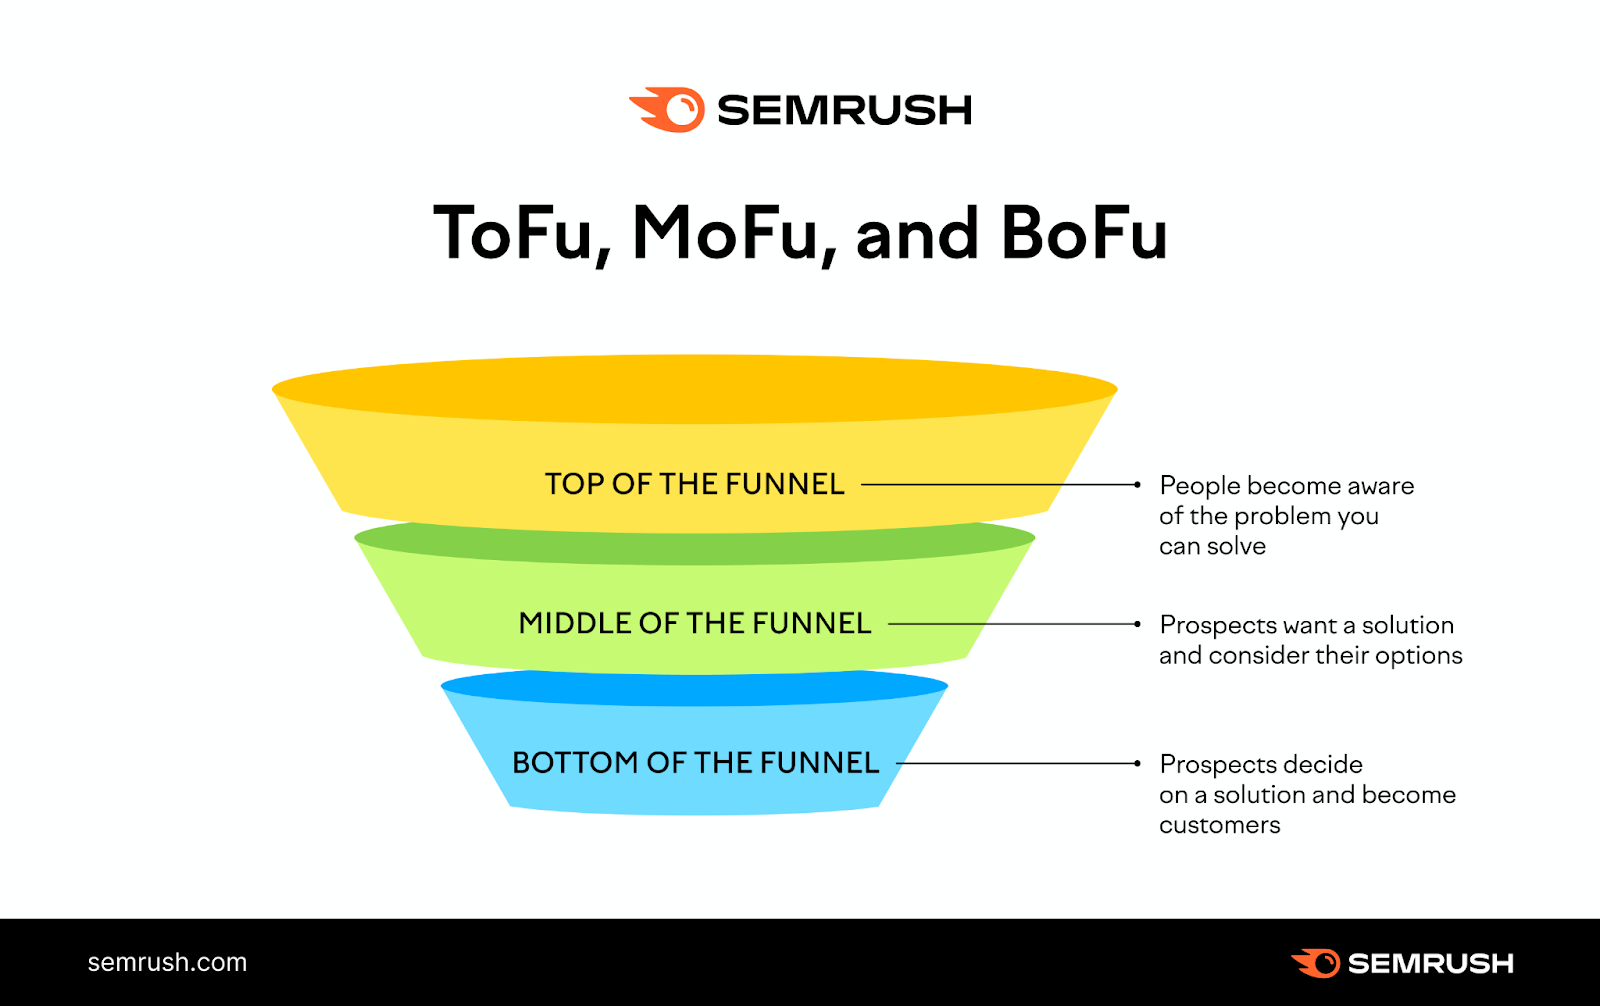 ToFu, MoFu and BoFu stages of the marketing funnel